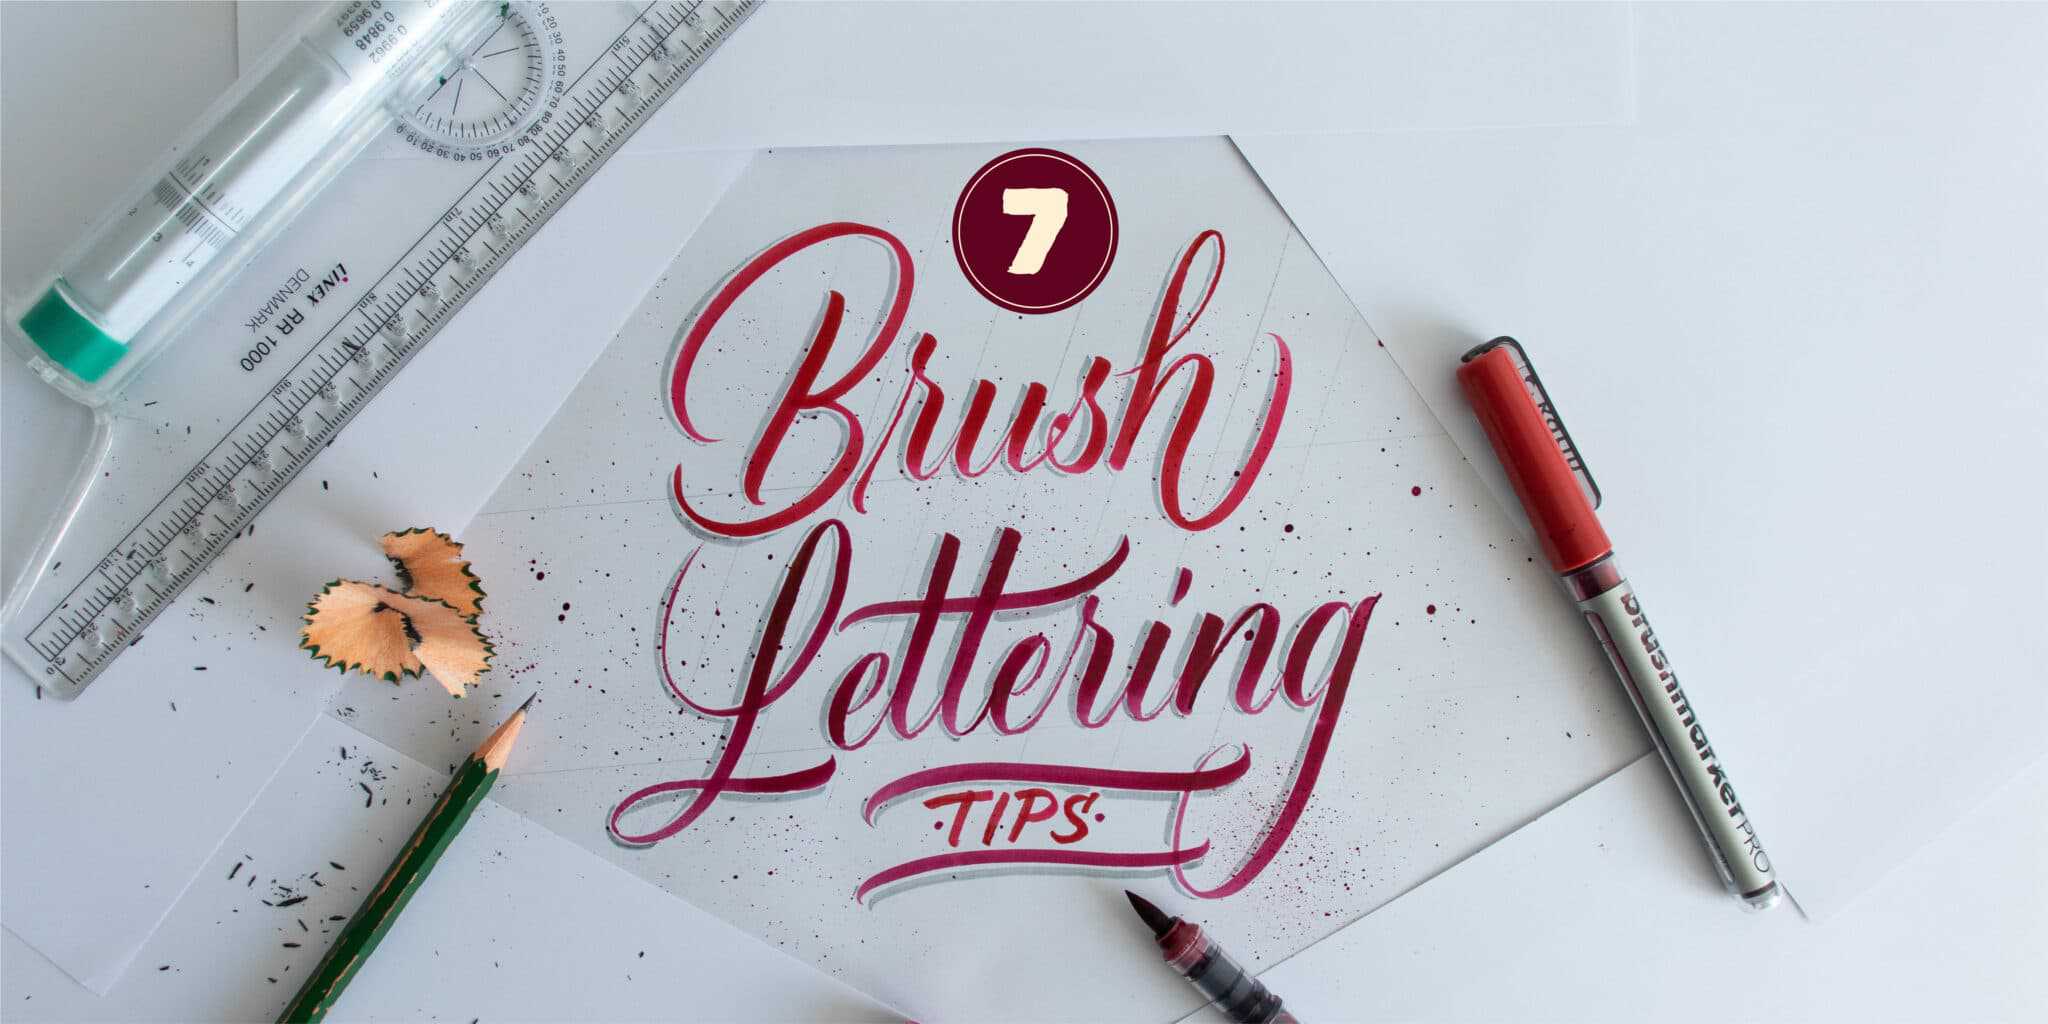 7-brush-calligraphy-tips-for-beginners-2022-lettering-daily